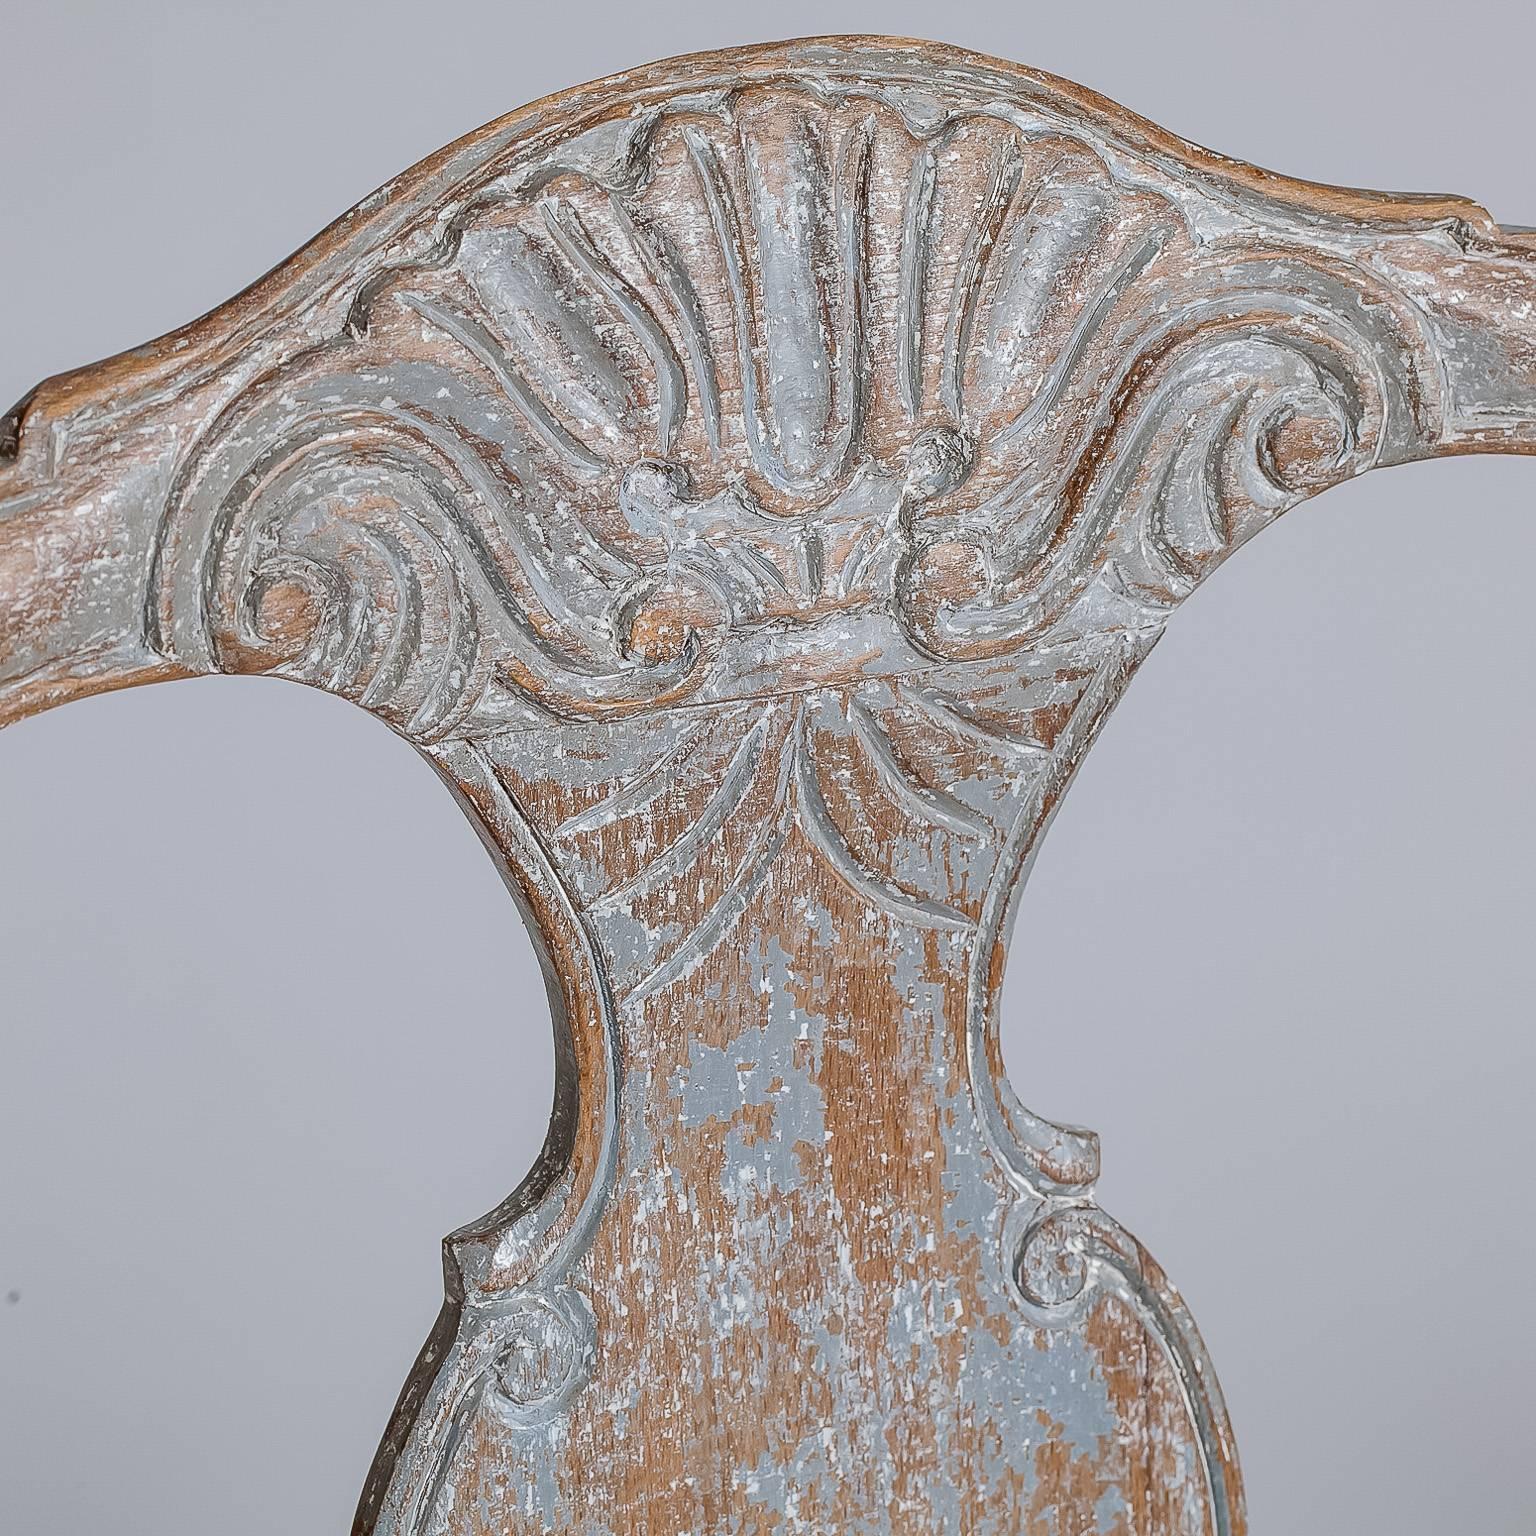 The chairs have the original blue grey patina and beautifully detailed shell carvings on the back and apron that are typical of the Rococo style.